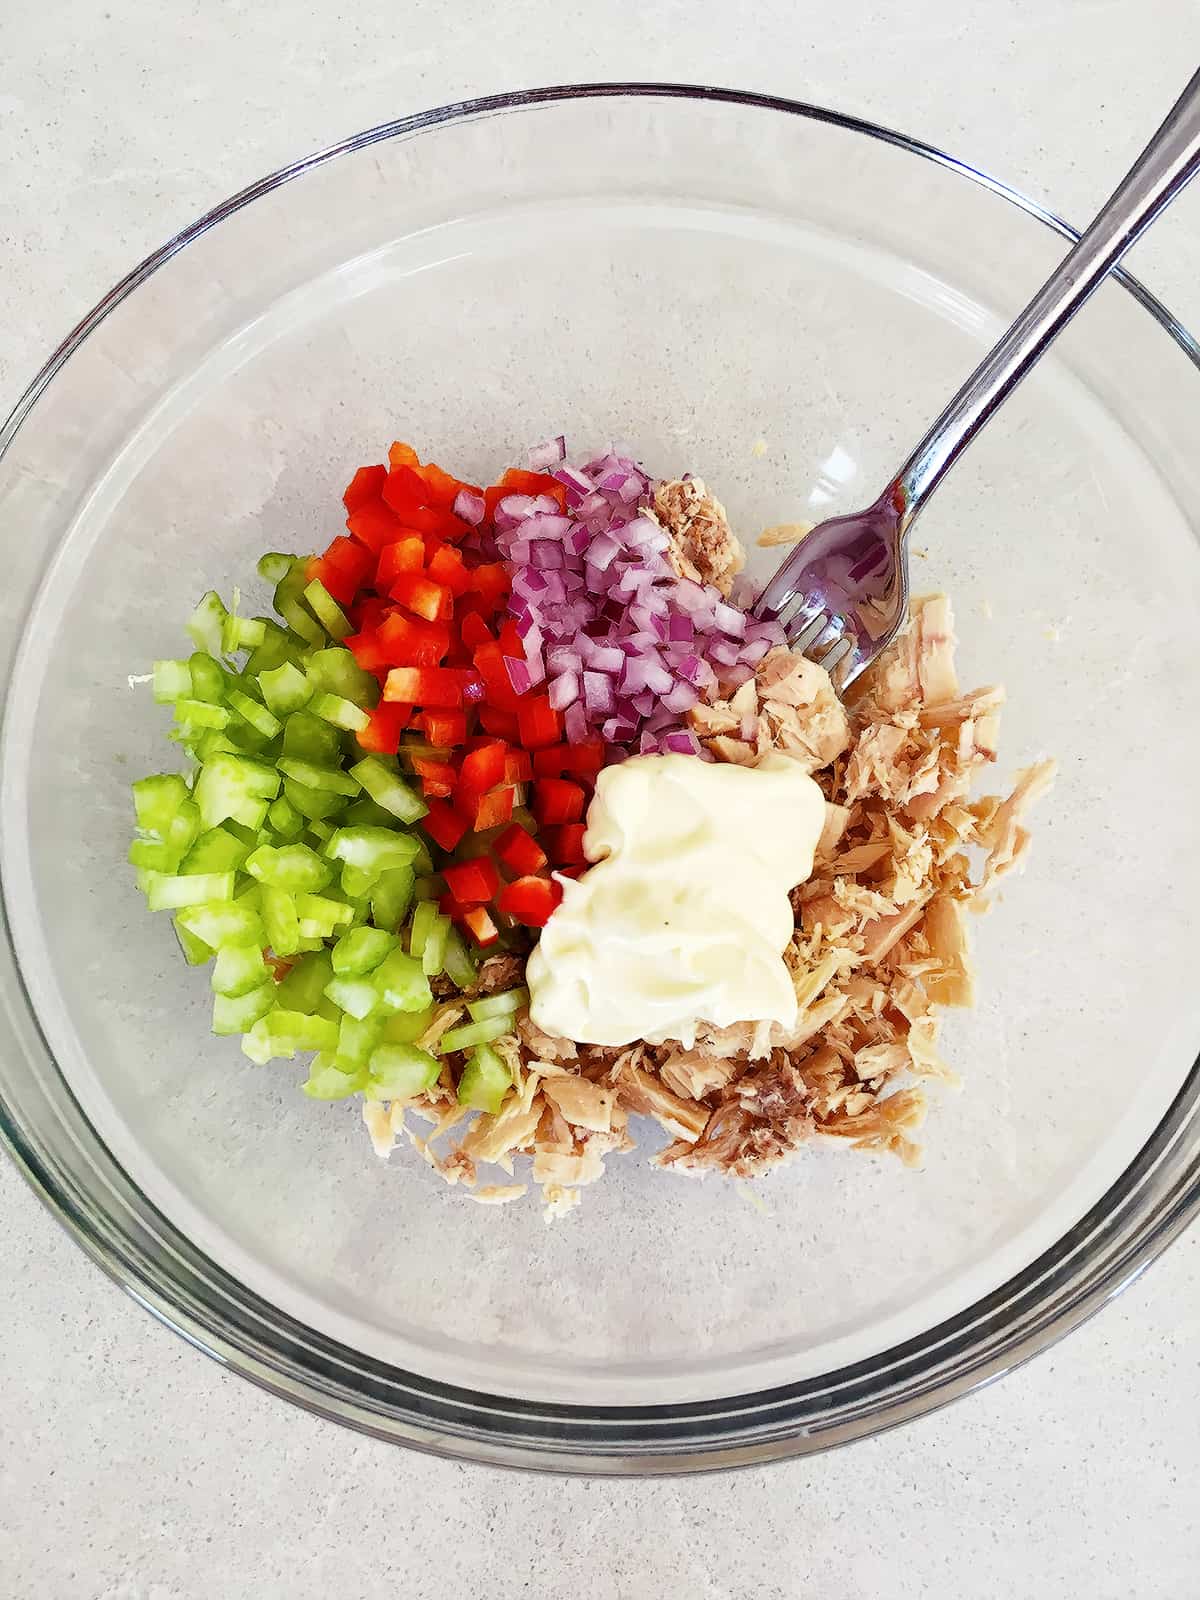 Chopped veggies with mayonnaise and tuna in a glass mixing bowl